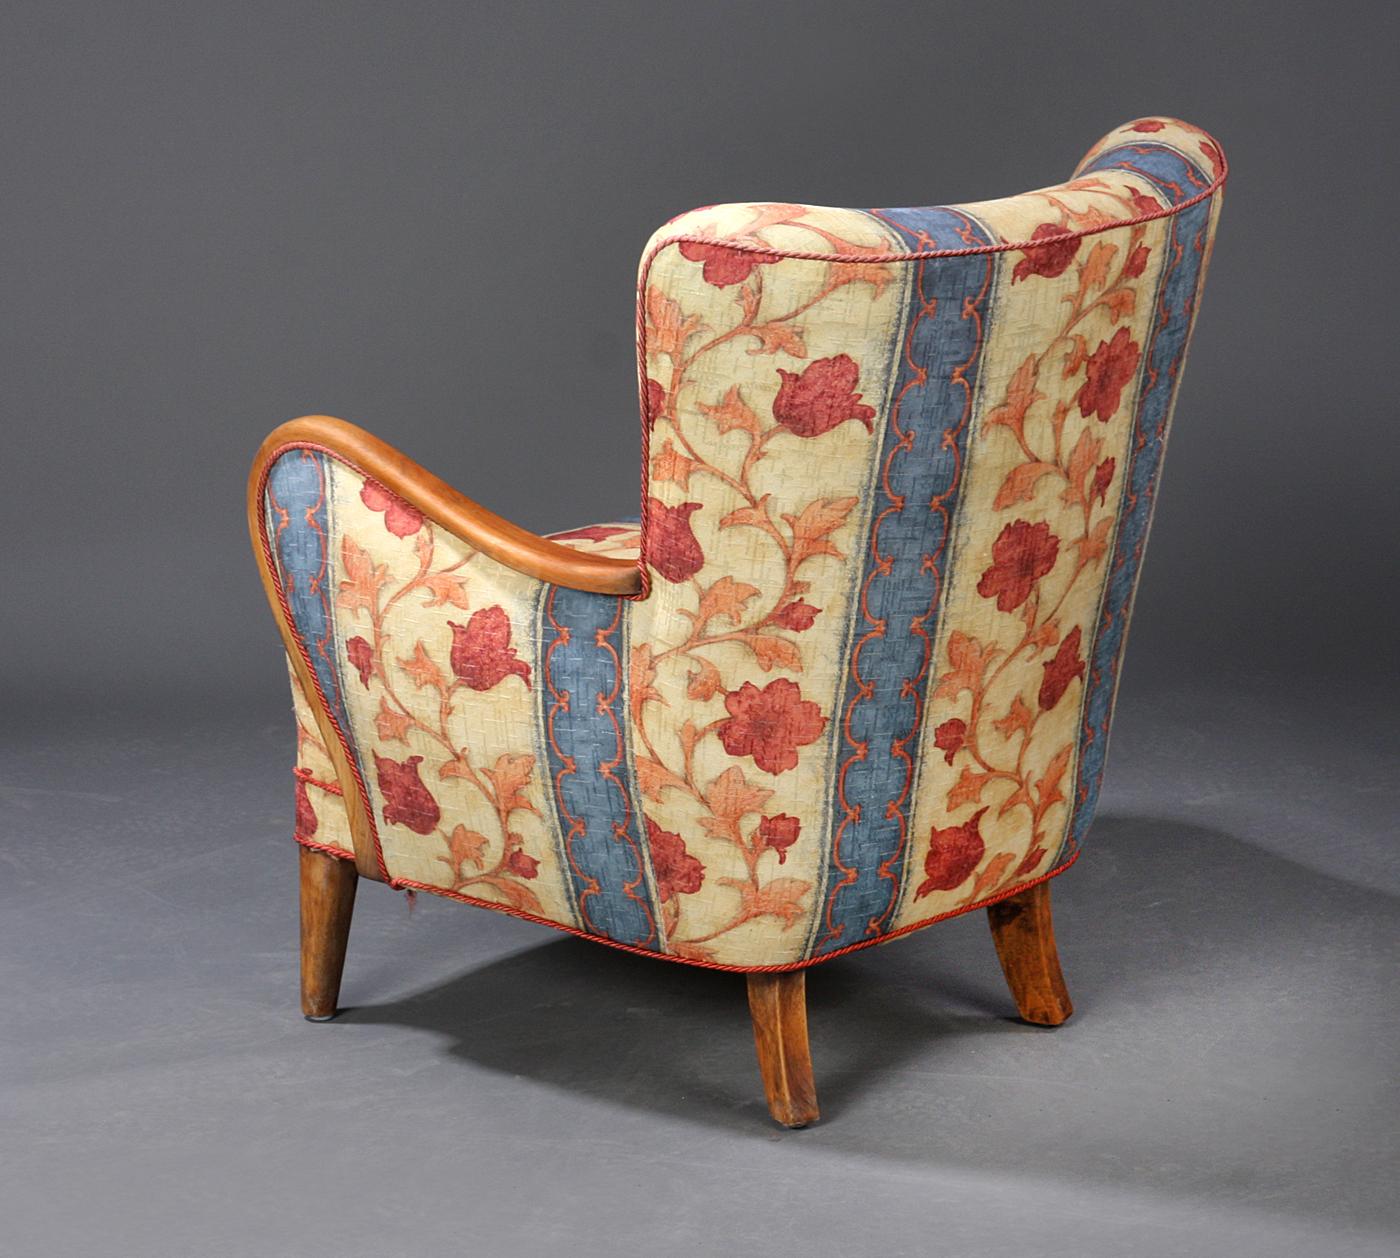 Danish furniture manufacturer, fine upholstered lounge chair with bentwood arms and later floral upholstery, beech frame, 1940-1950.